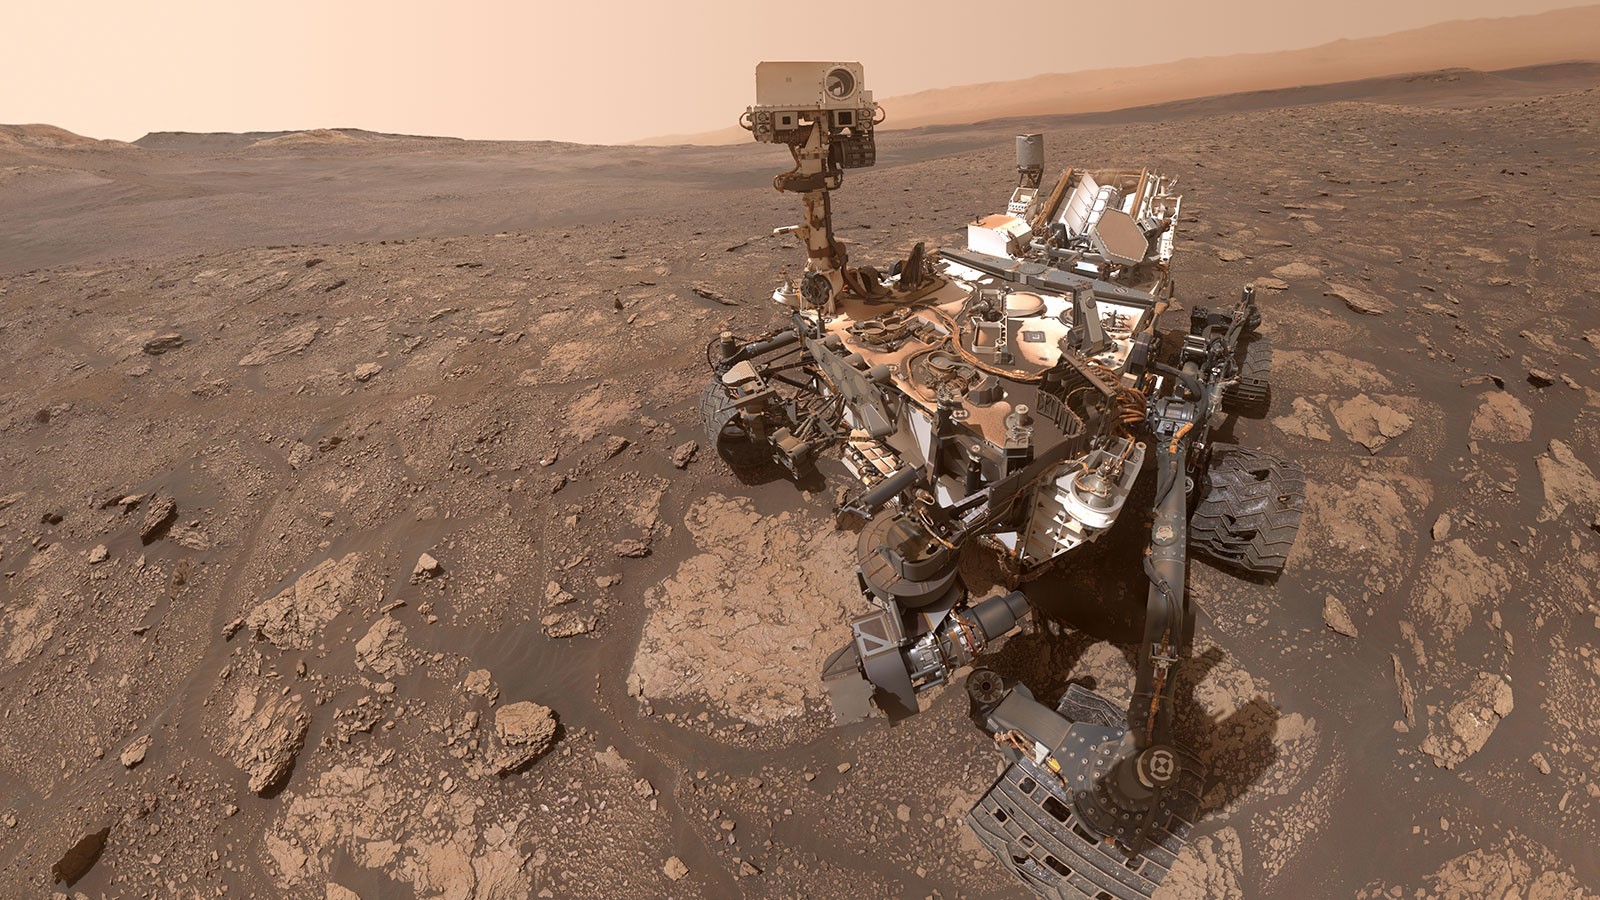 : Curiosity at Mary Anning, Gale Crater